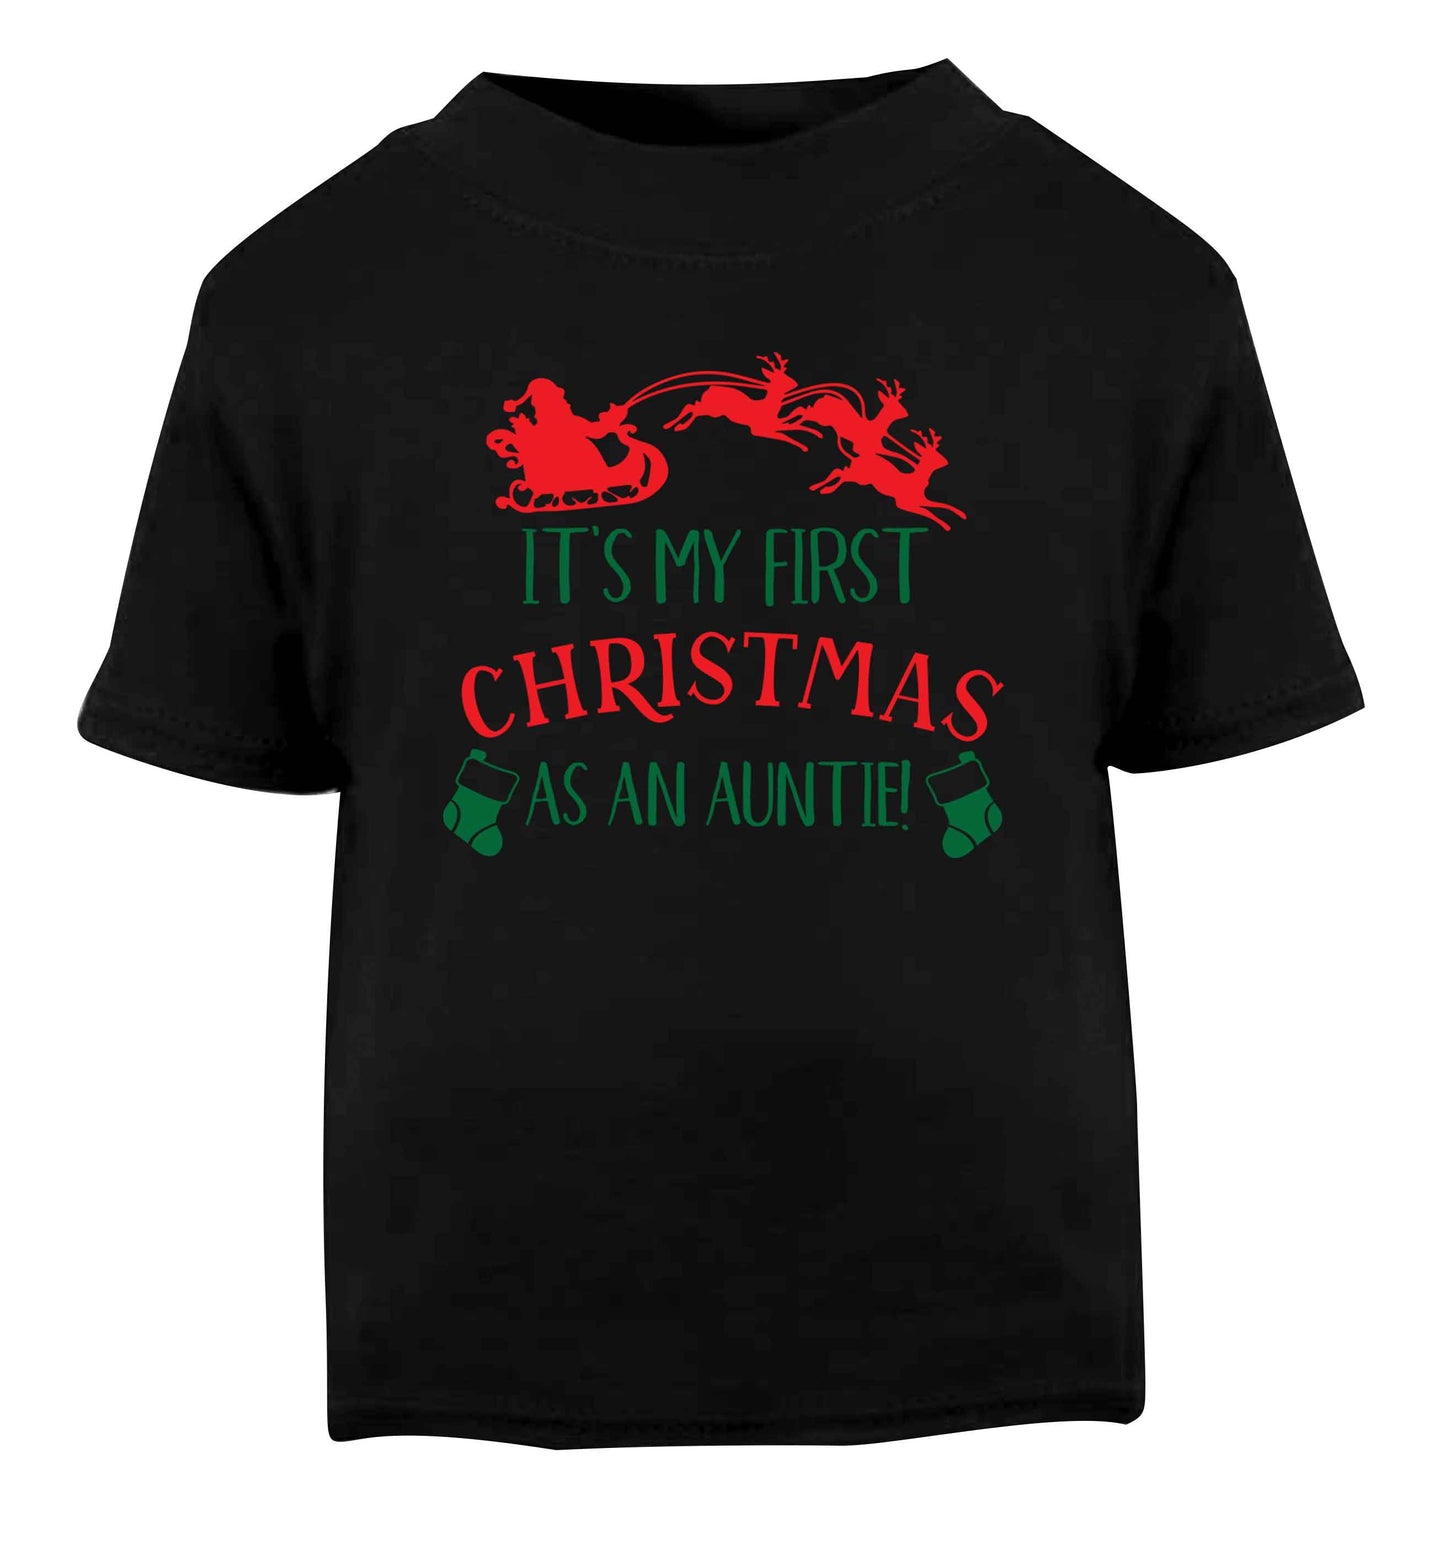 It's my first Christmas as an auntie! Black Baby Toddler Tshirt 2 years